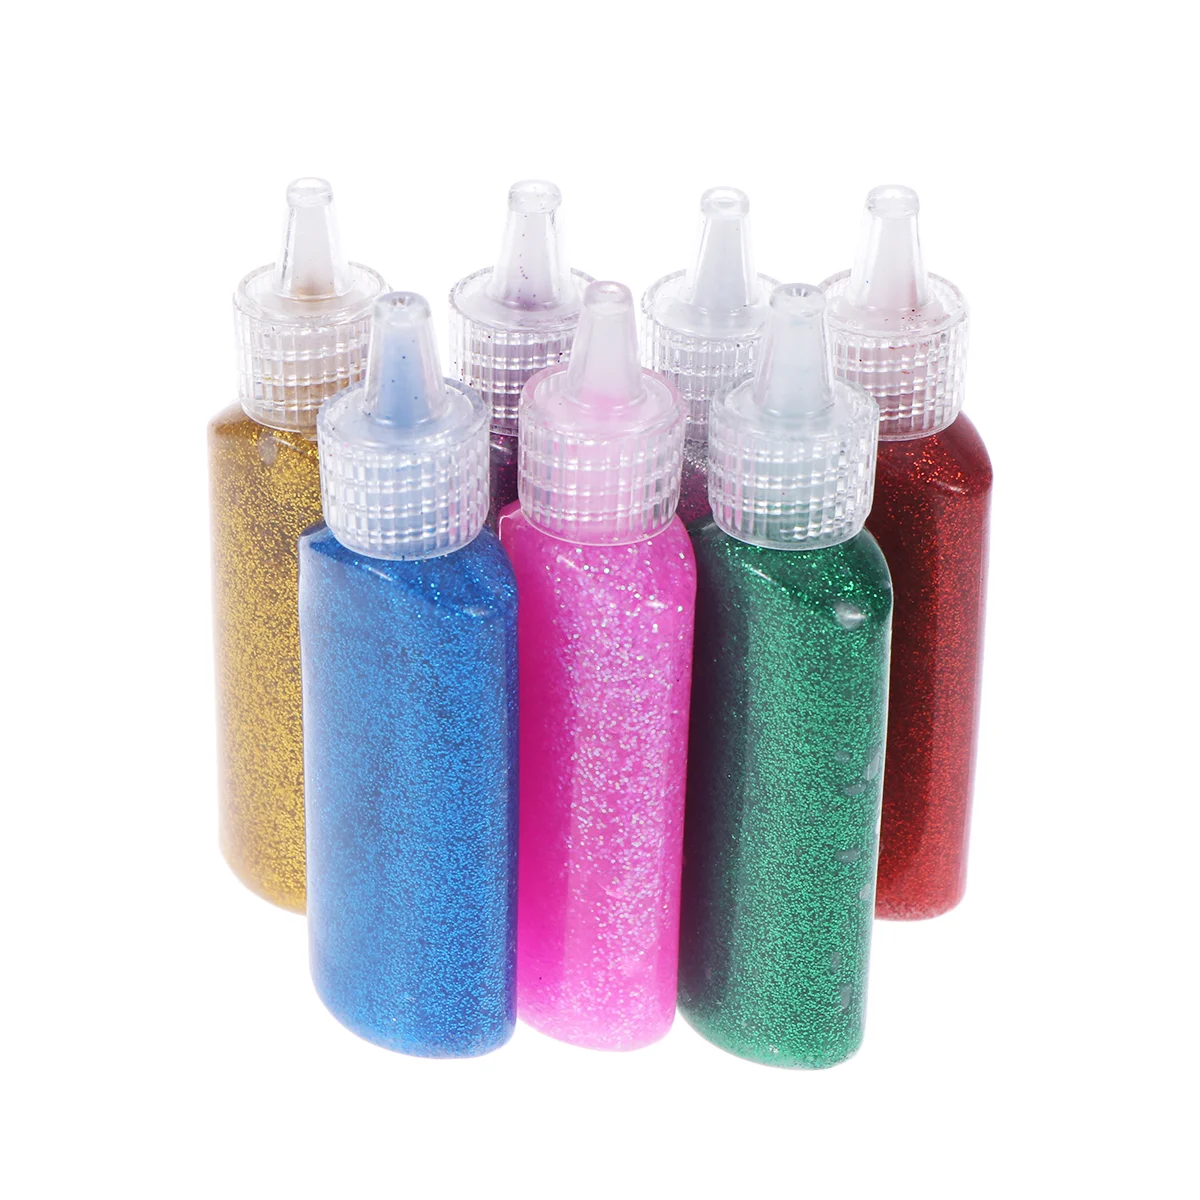 7 Pcs Glitter Glue Set Children Painting Tools for DIY Wooden Crafts Paper Cutting Artificial Flowers